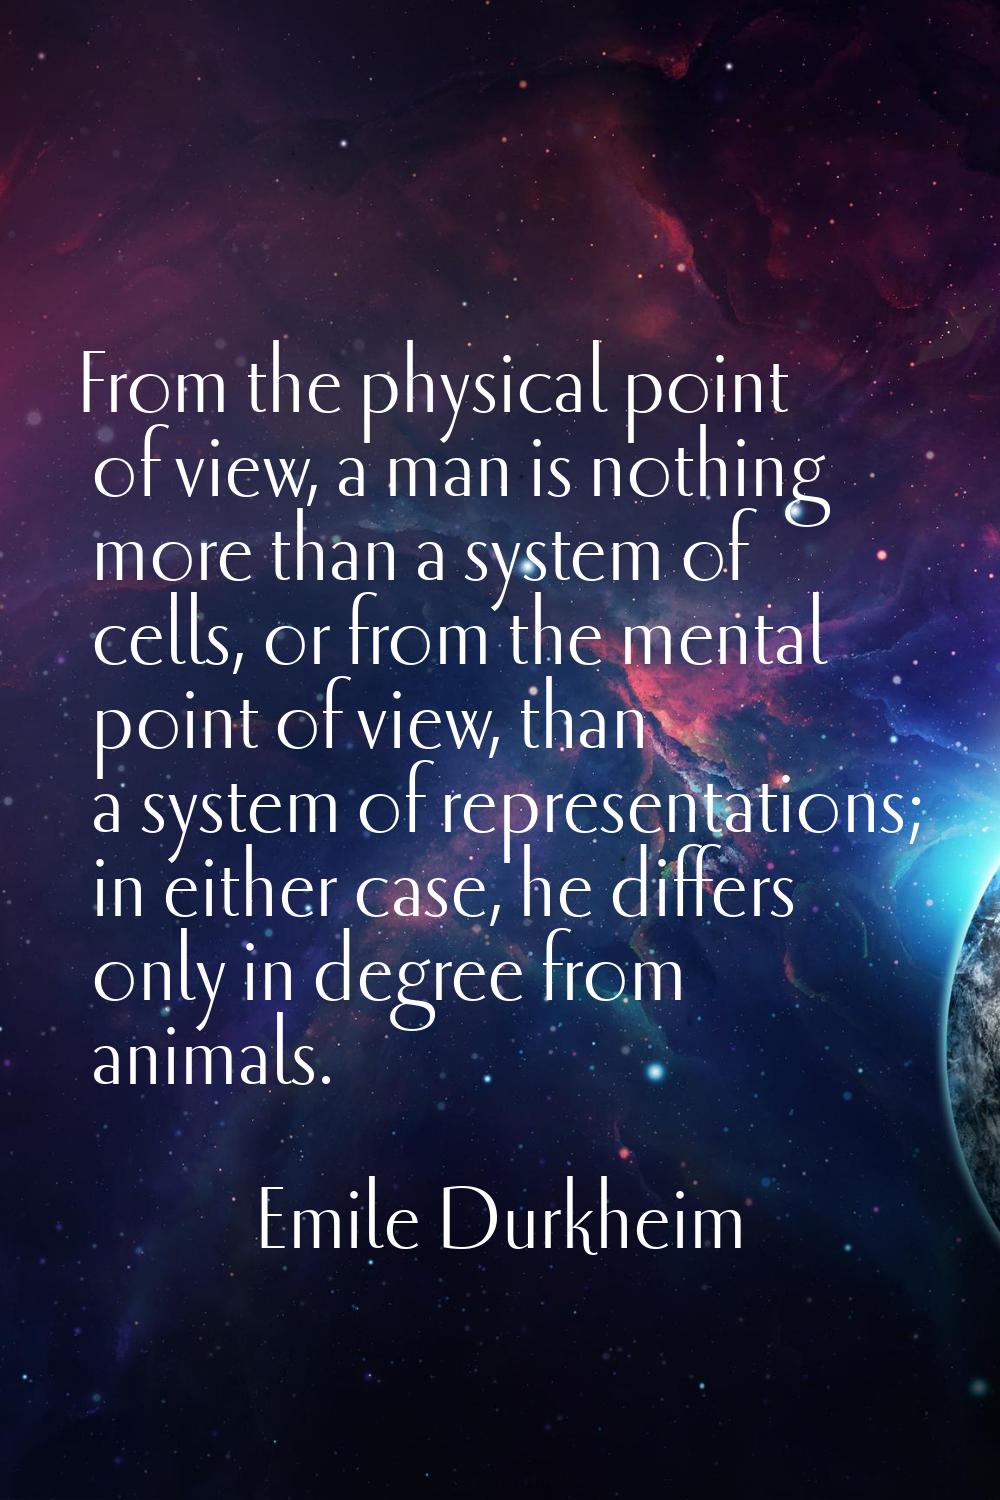 From the physical point of view, a man is nothing more than a system of cells, or from the mental p